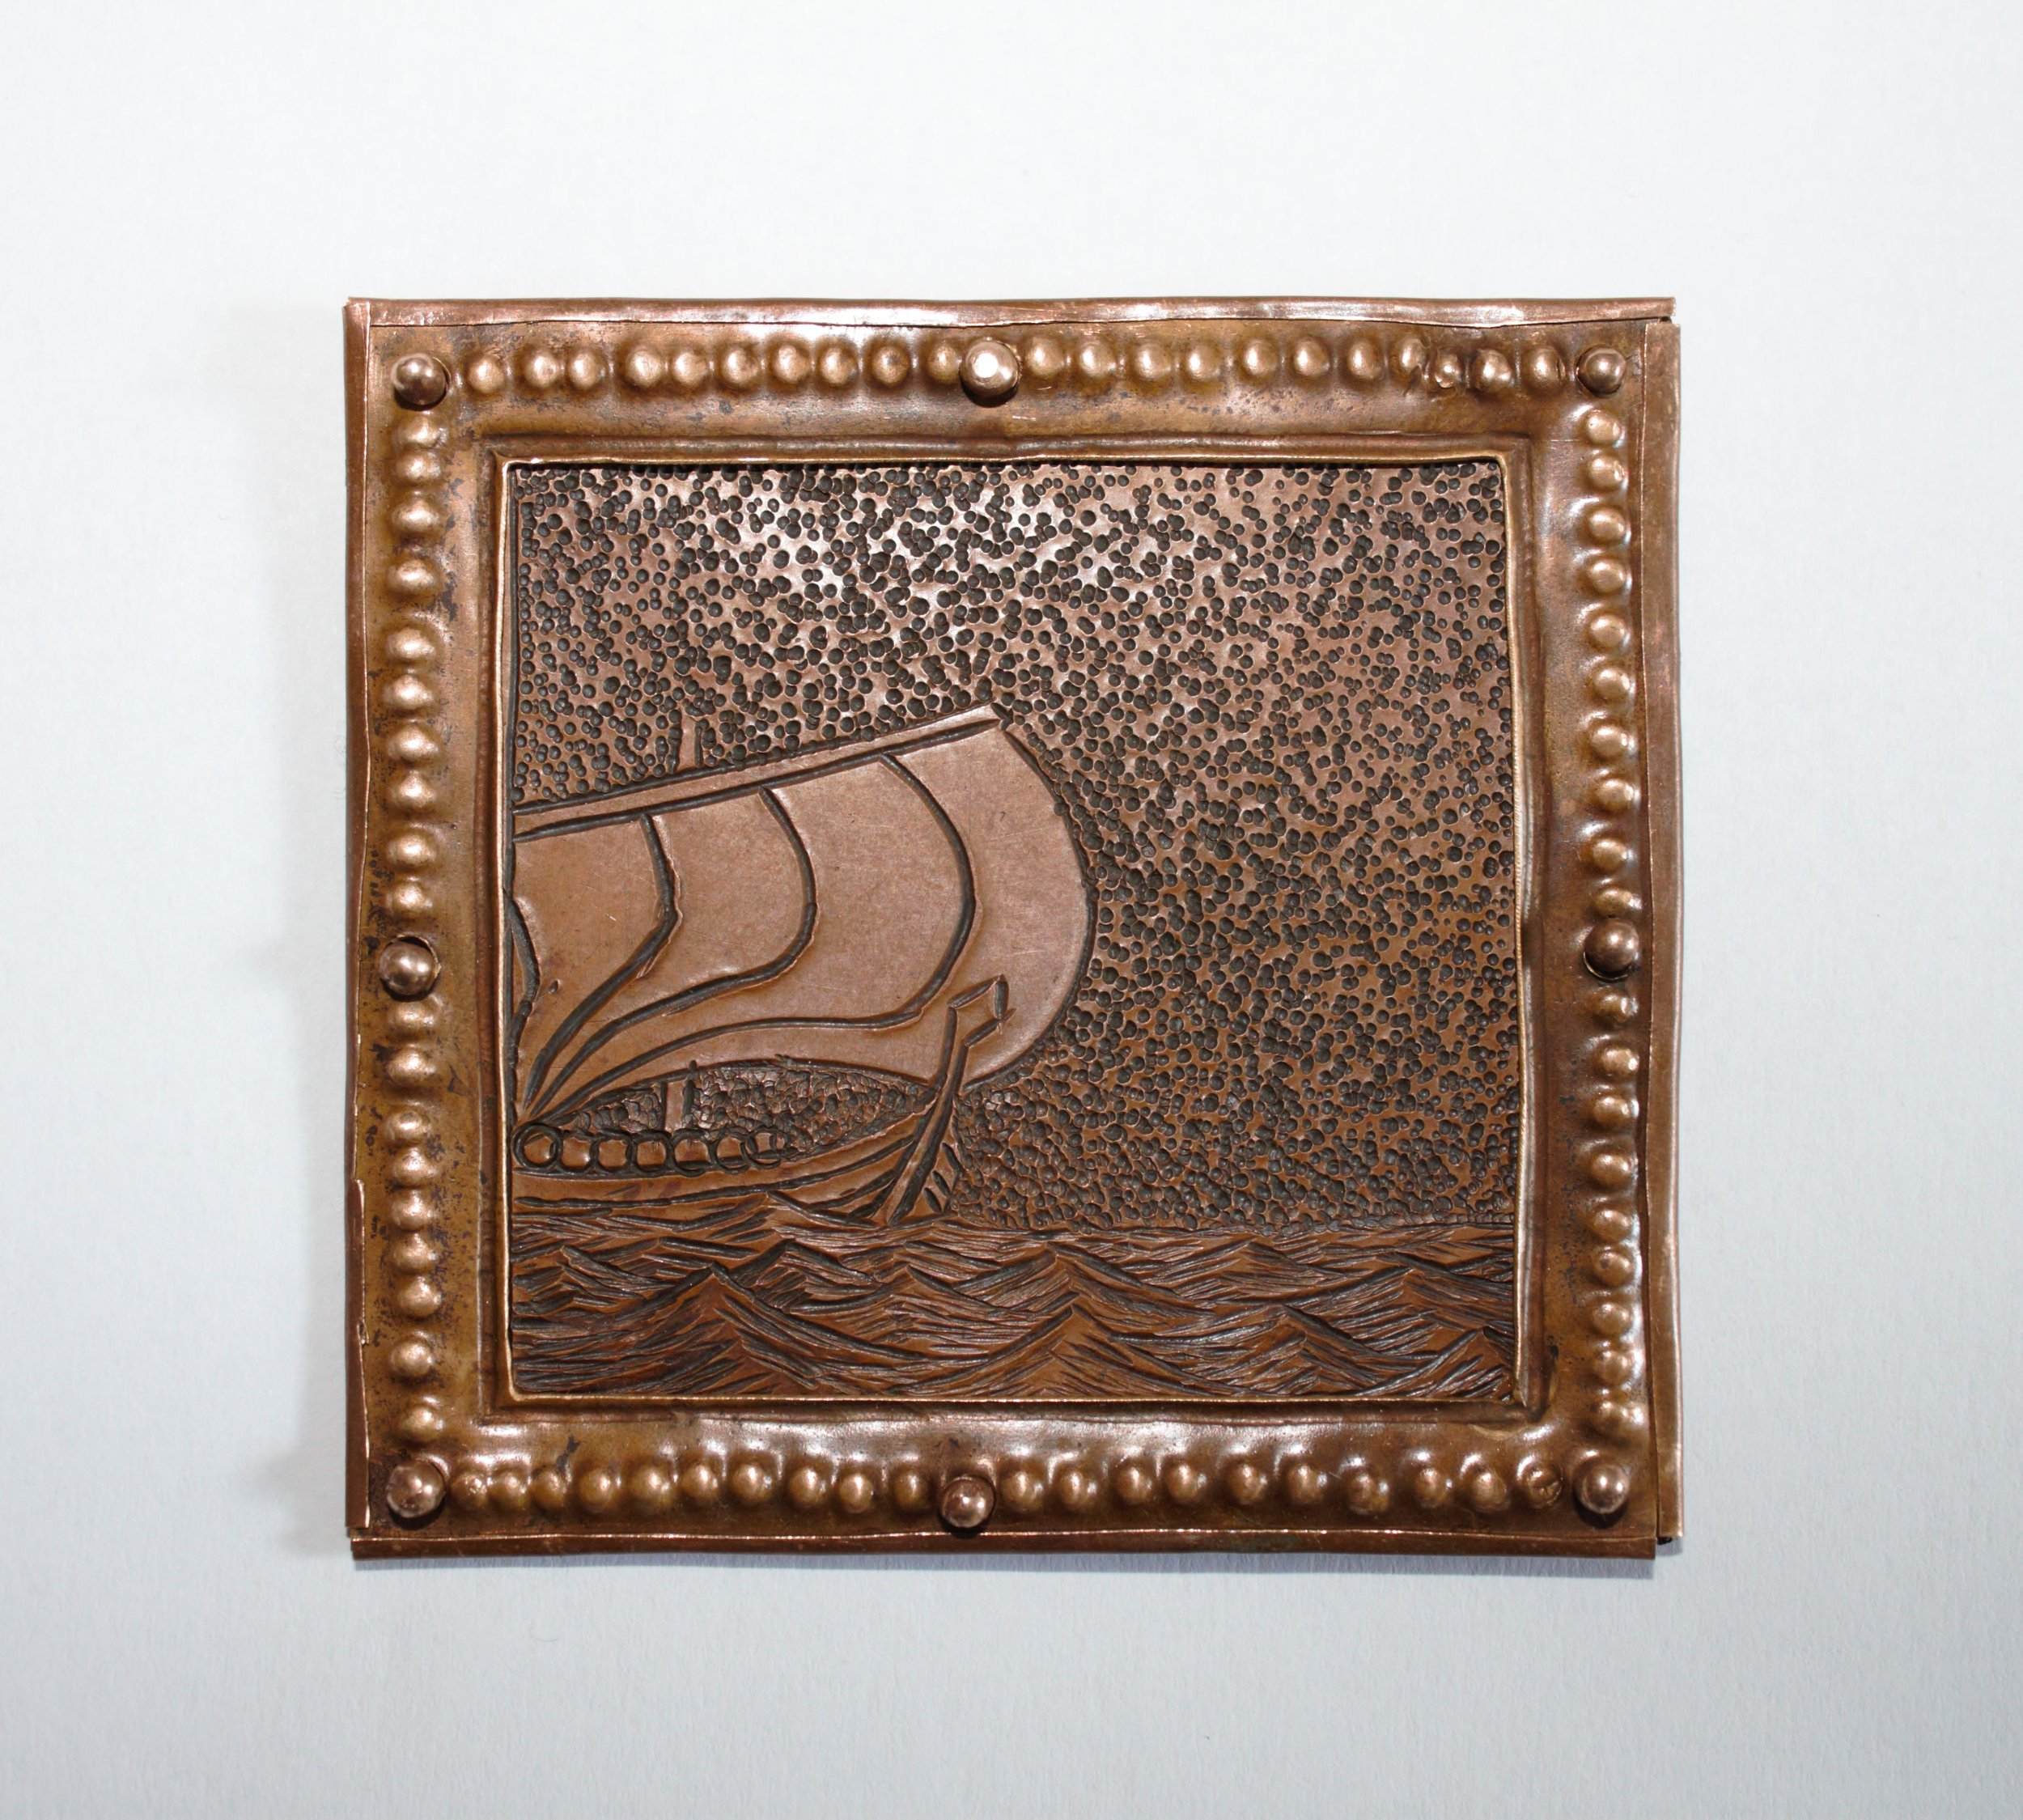 Framed Longboat Panel (A Ship to Cross the Sea of Suffering)